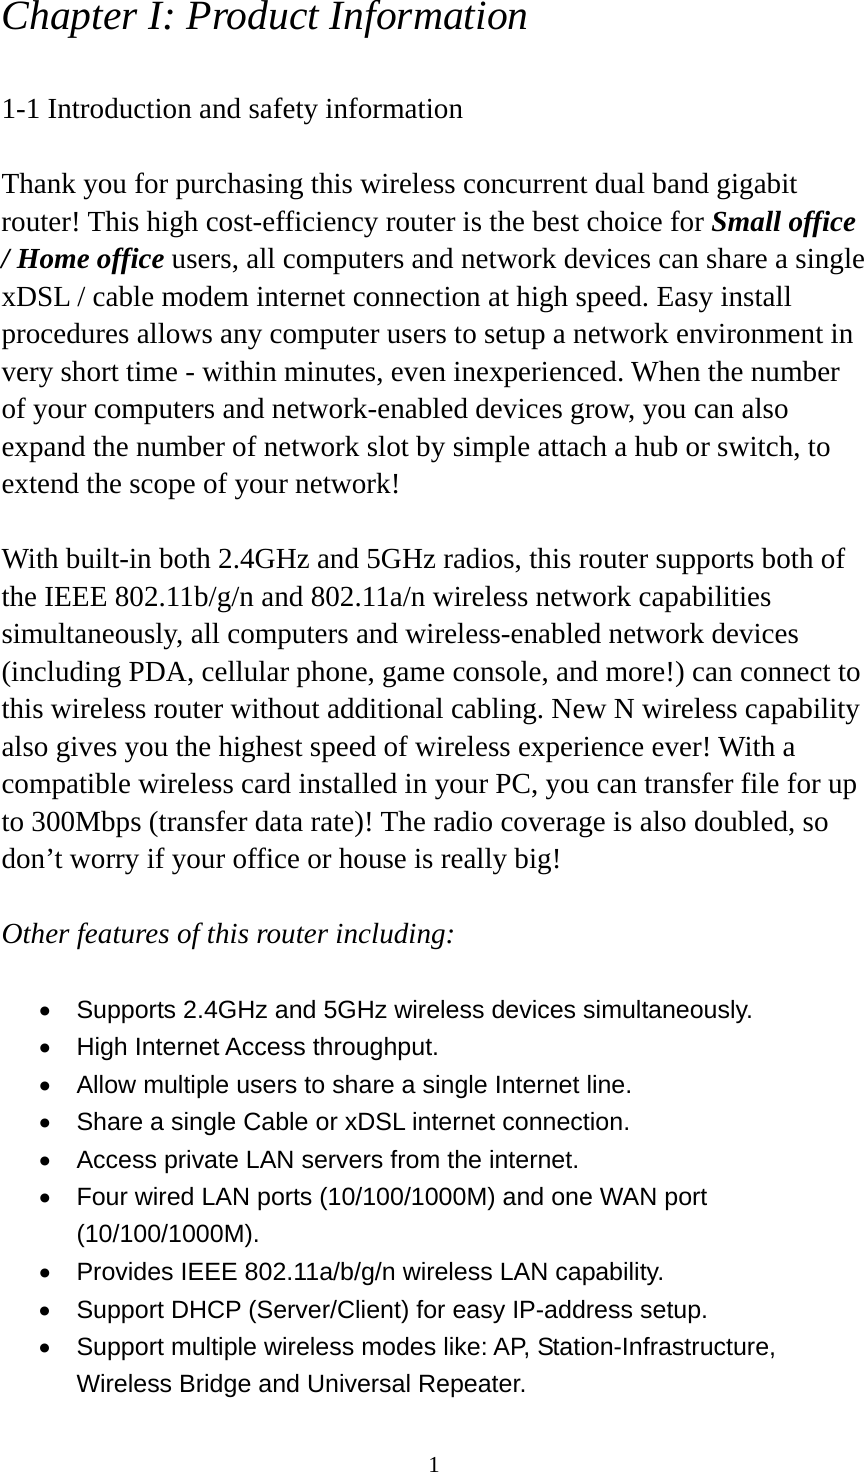 1 Chapter I: Product Information  1-1 Introduction and safety information  Thank you for purchasing this wireless concurrent dual band gigabit router! This high cost-efficiency router is the best choice for Small office / Home office users, all computers and network devices can share a single xDSL / cable modem internet connection at high speed. Easy install procedures allows any computer users to setup a network environment in very short time - within minutes, even inexperienced. When the number of your computers and network-enabled devices grow, you can also expand the number of network slot by simple attach a hub or switch, to extend the scope of your network!  With built-in both 2.4GHz and 5GHz radios, this router supports both of the IEEE 802.11b/g/n and 802.11a/n wireless network capabilities simultaneously, all computers and wireless-enabled network devices (including PDA, cellular phone, game console, and more!) can connect to this wireless router without additional cabling. New N wireless capability also gives you the highest speed of wireless experience ever! With a compatible wireless card installed in your PC, you can transfer file for up to 300Mbps (transfer data rate)! The radio coverage is also doubled, so don’t worry if your office or house is really big!  Other features of this router including:  •  Supports 2.4GHz and 5GHz wireless devices simultaneously. •  High Internet Access throughput. •  Allow multiple users to share a single Internet line.   •  Share a single Cable or xDSL internet connection. •  Access private LAN servers from the internet. •  Four wired LAN ports (10/100/1000M) and one WAN port (10/100/1000M). •  Provides IEEE 802.11a/b/g/n wireless LAN capability. •  Support DHCP (Server/Client) for easy IP-address setup.   •  Support multiple wireless modes like: AP, Station-Infrastructure, Wireless Bridge and Universal Repeater. 